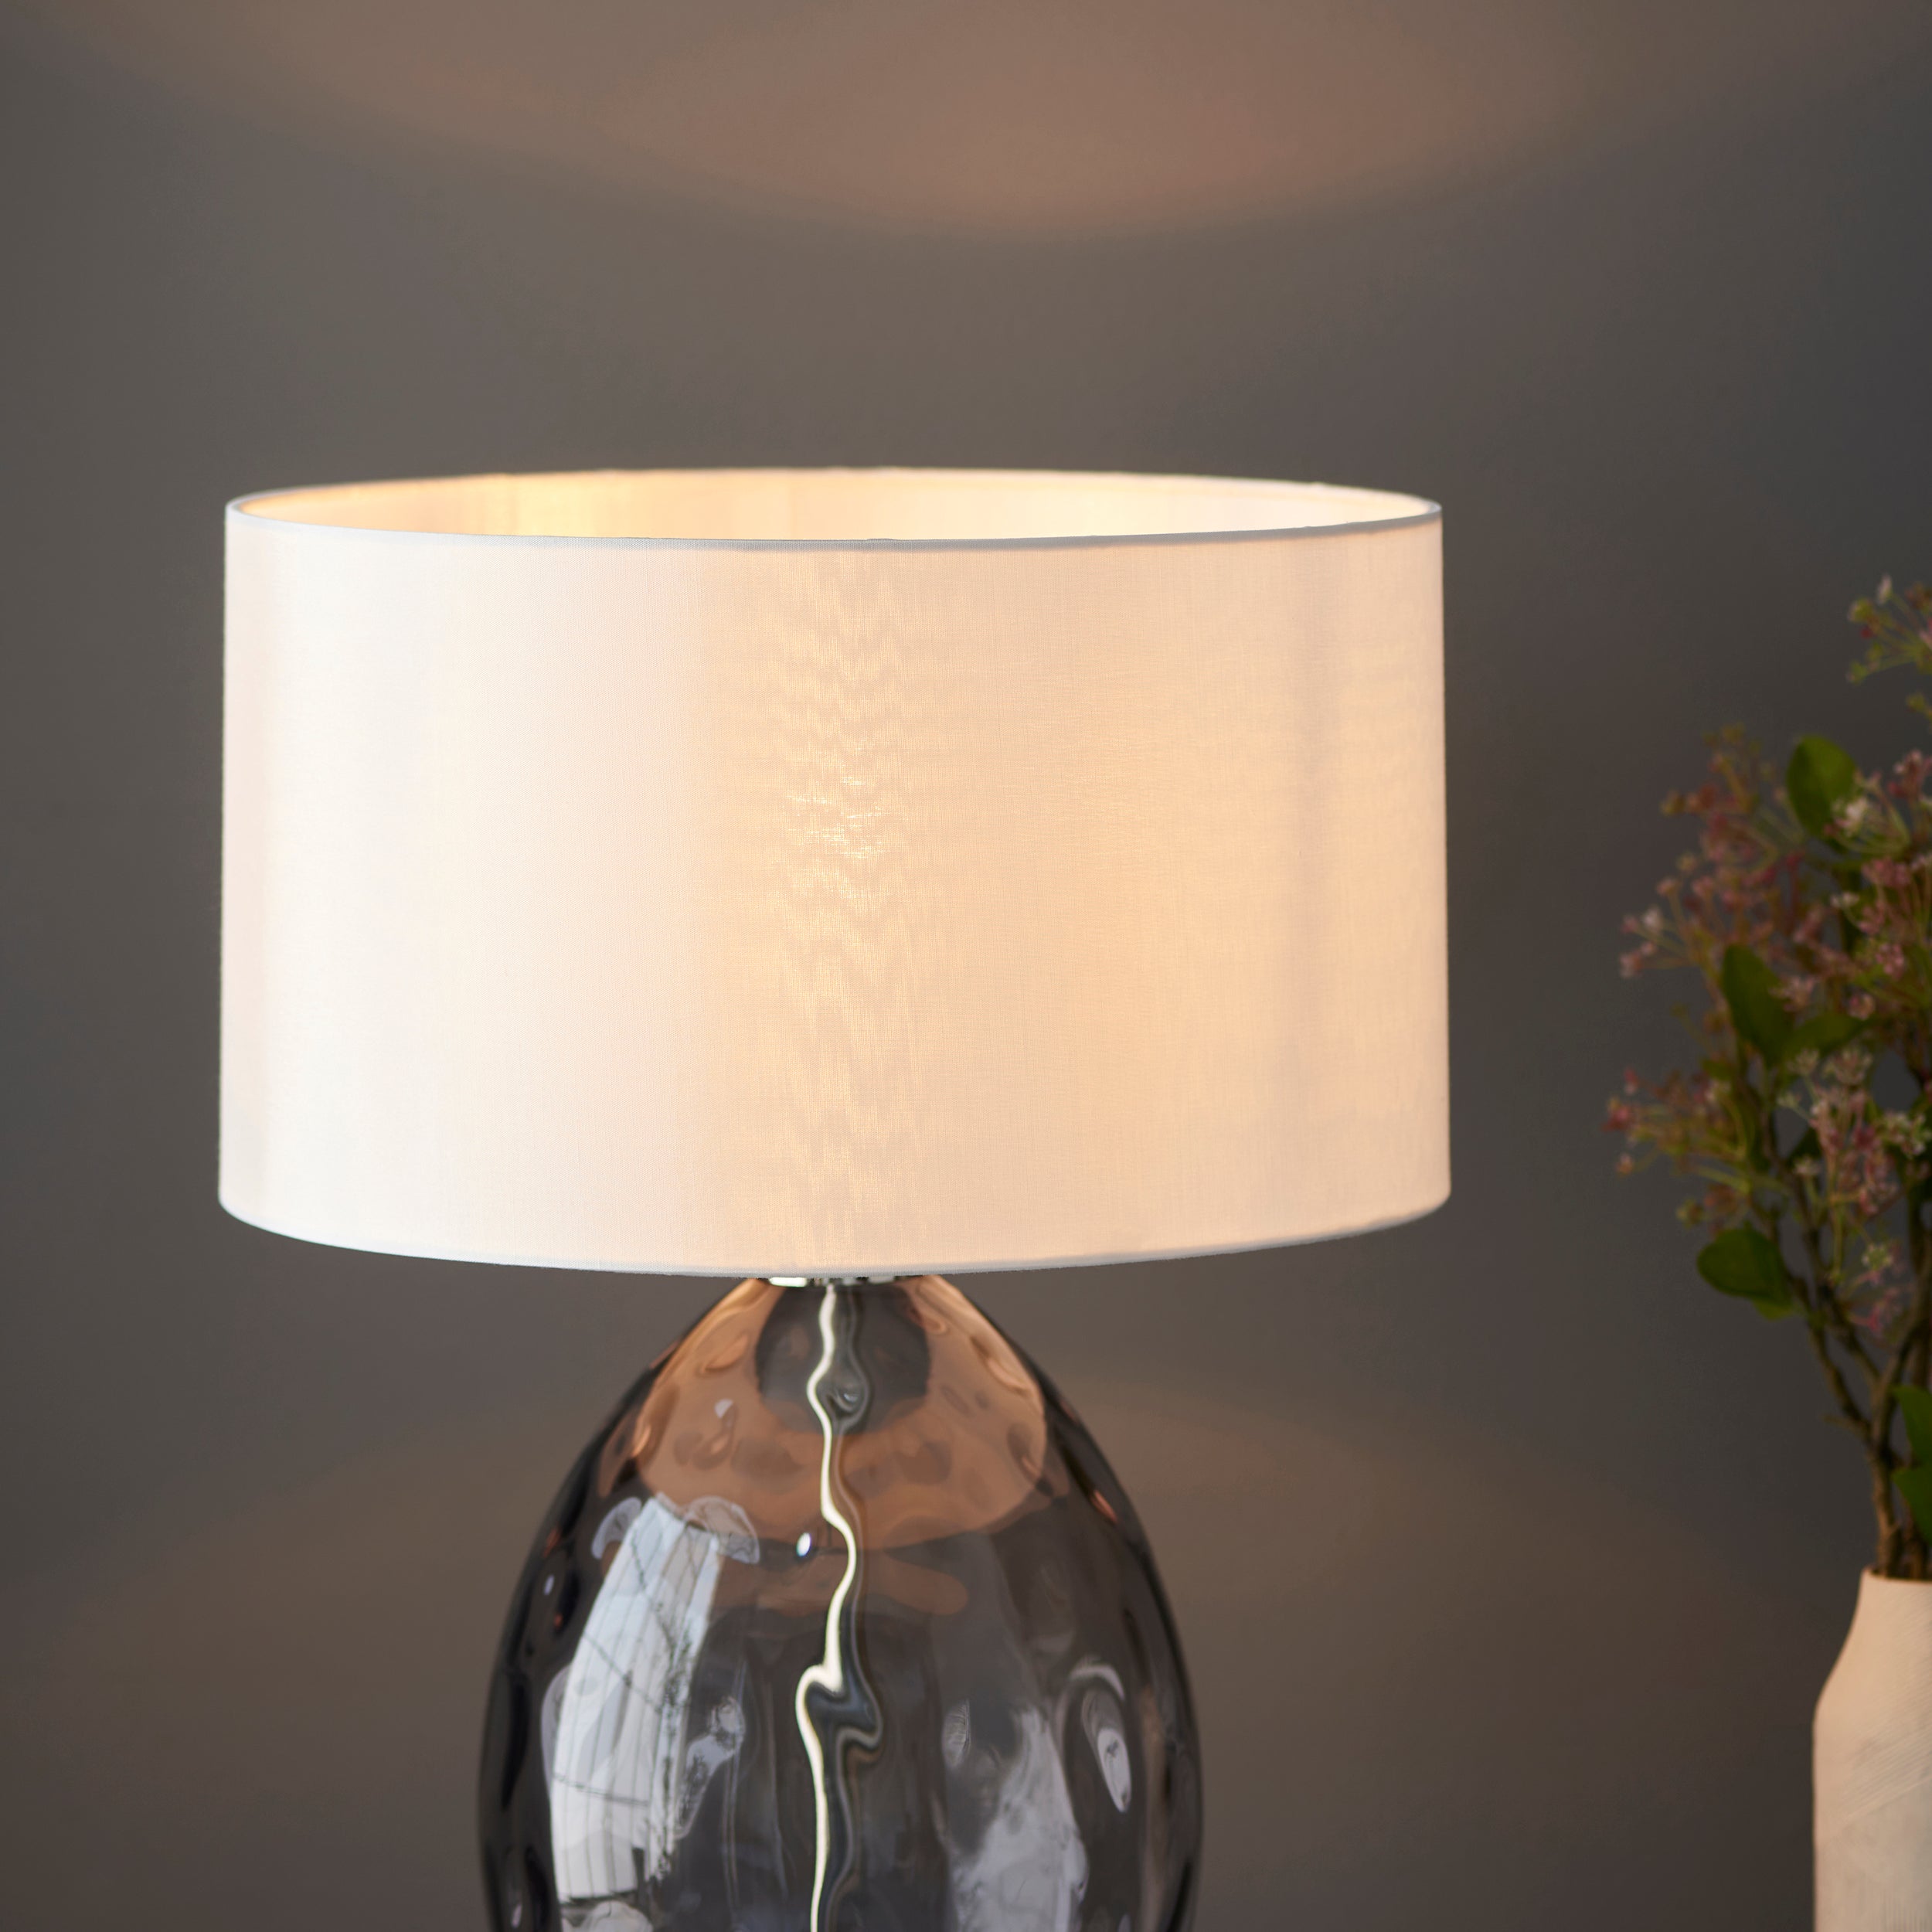 Lightologist Grey tinted glass, bright nickel plate with vintage white fabric Base & shade Table Light